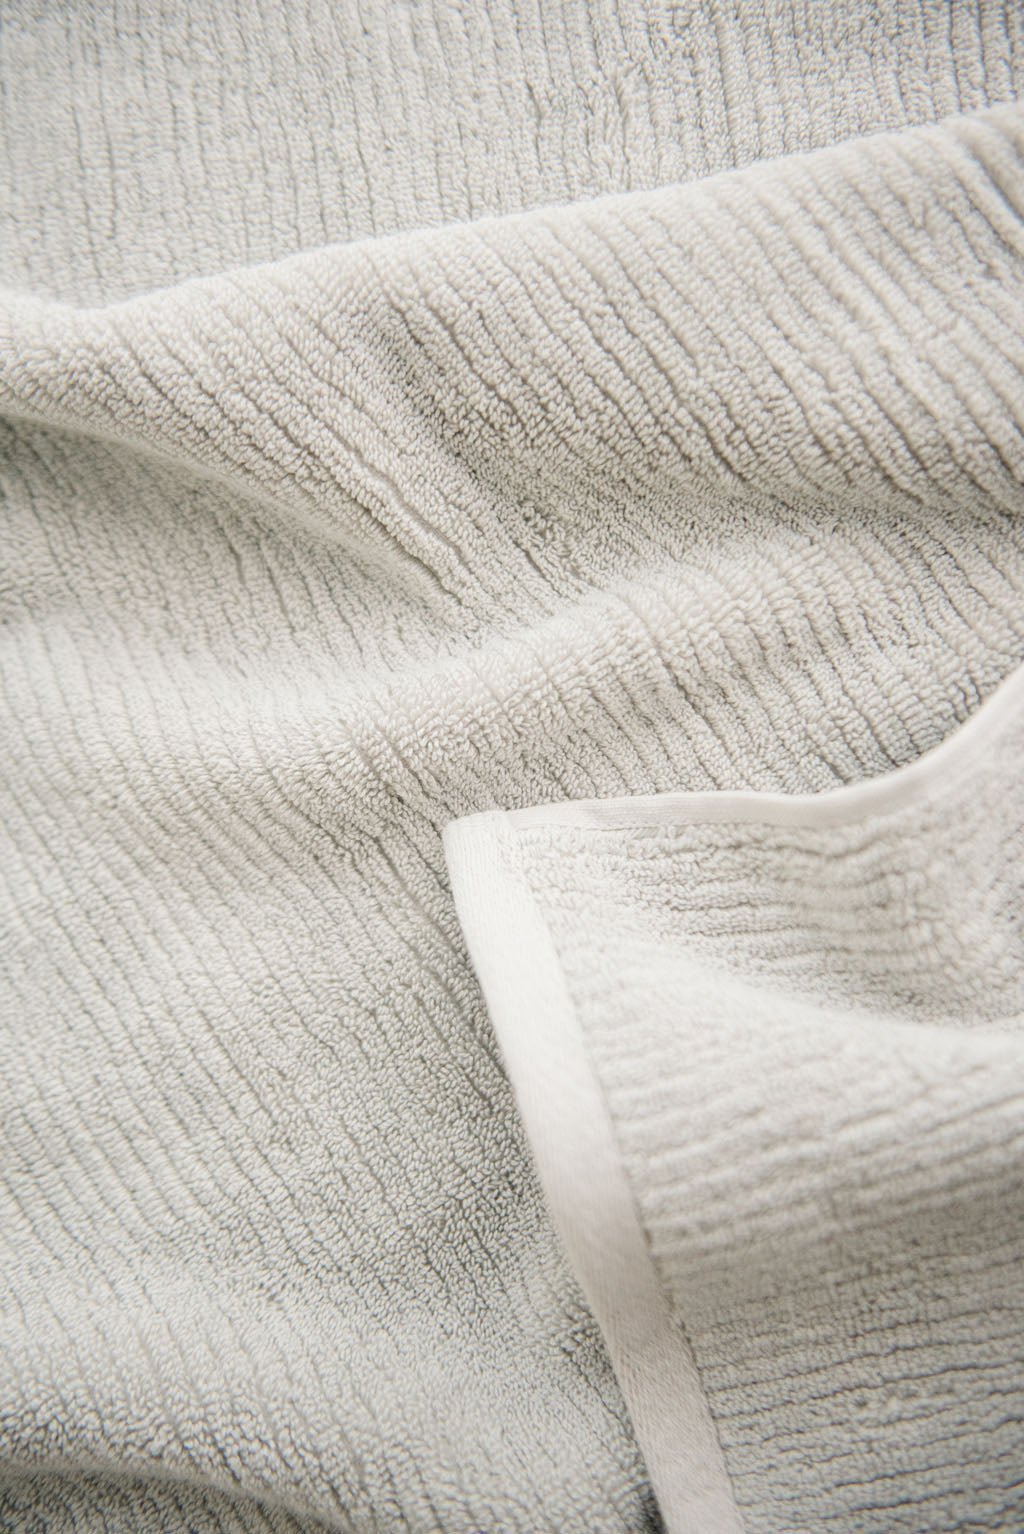 Ribbed Terry Hand Towel in the color Light Grey. Photo of Ribbed Terry Hand Towel taken as a close up of the towel. Only the towel is seen. 